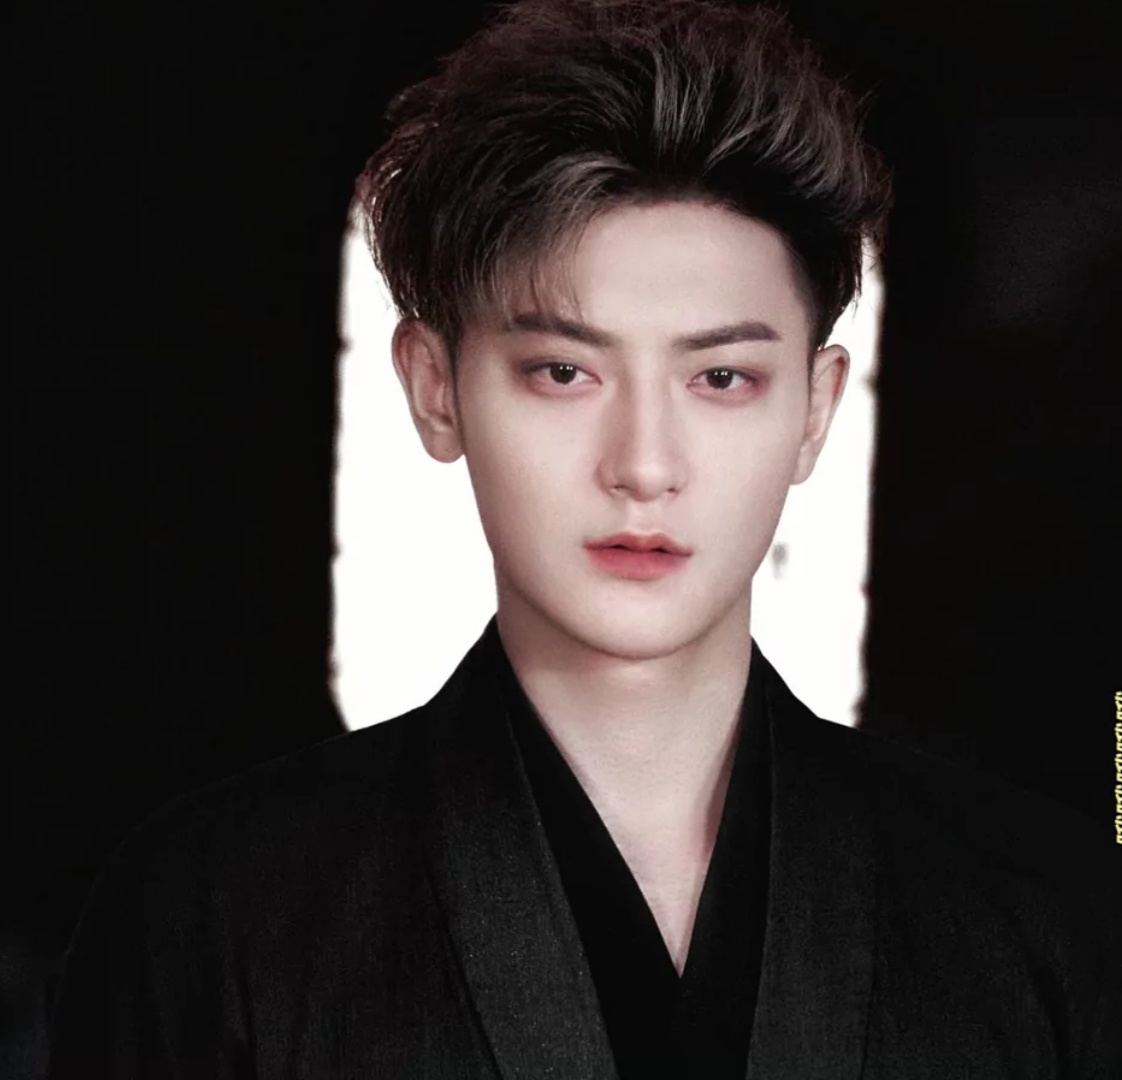 Happy Birthday to you, The YoungKingYoungBoss #HuangZitao.
Dont think to much. The real Hailangs always supports and believes in you. We will respect your choice. The first is to stay happy and healthy. Good luck, #ZTA